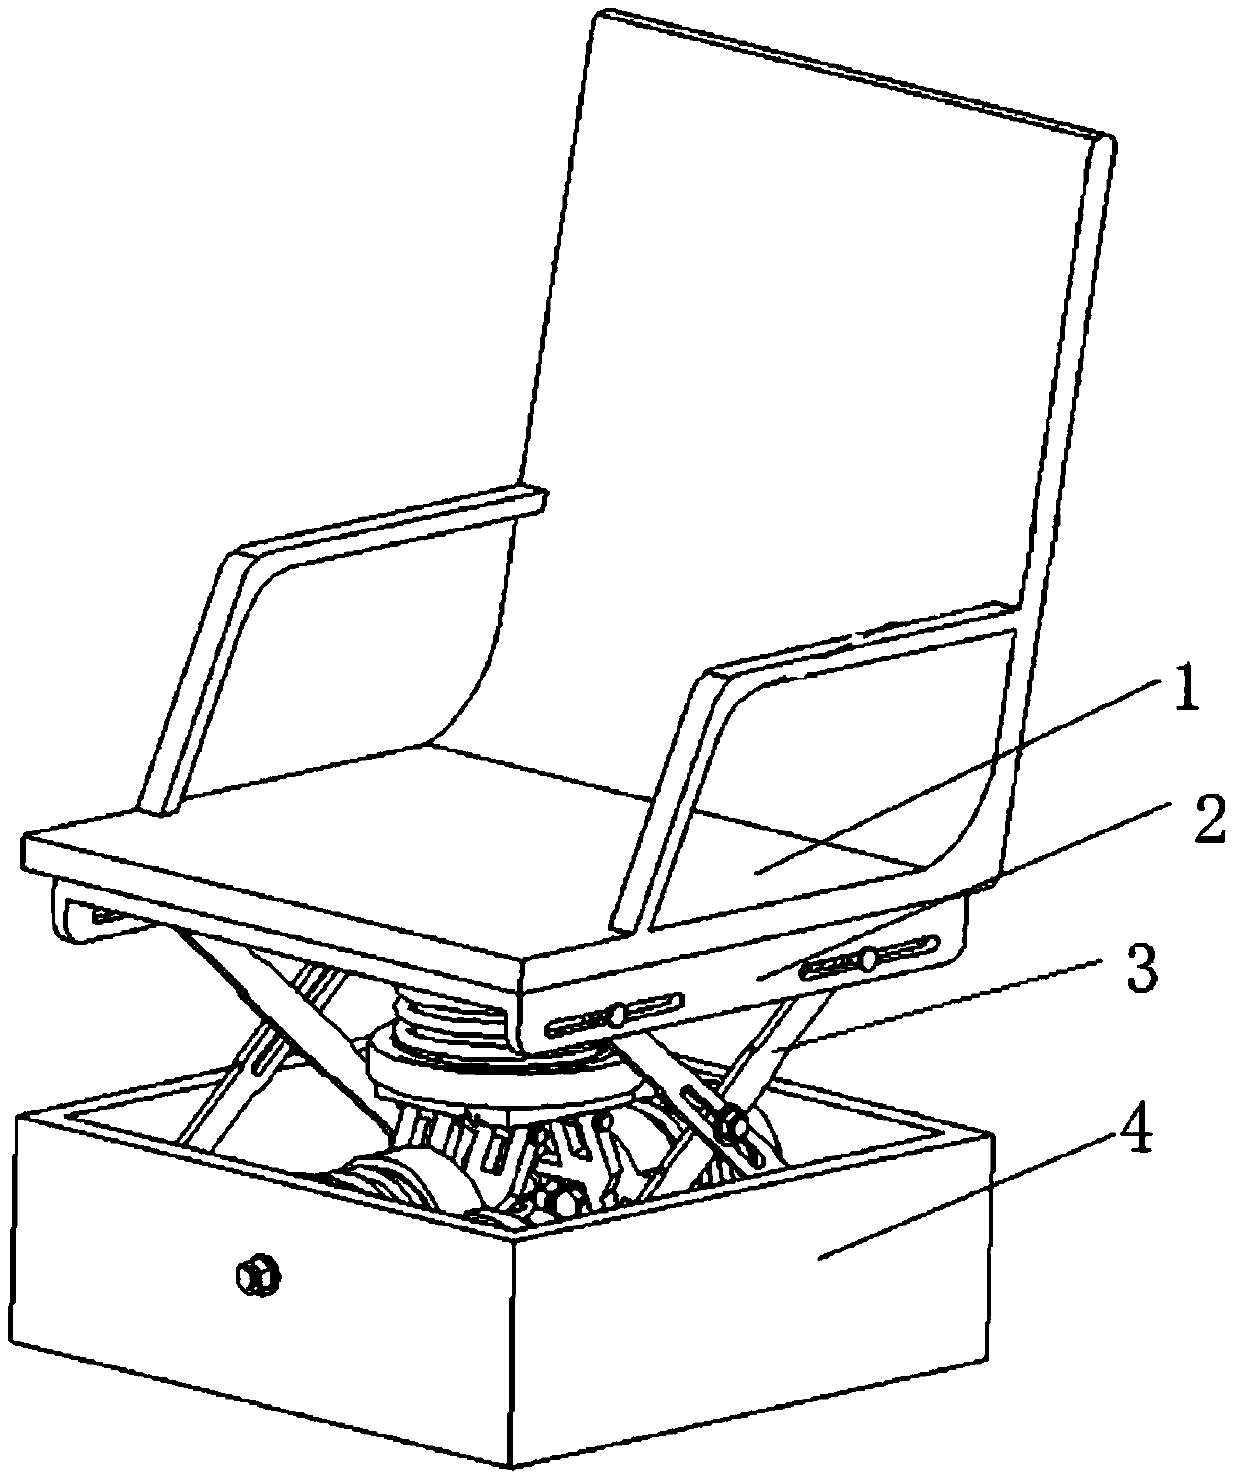 Double-layer vibration isolation chair